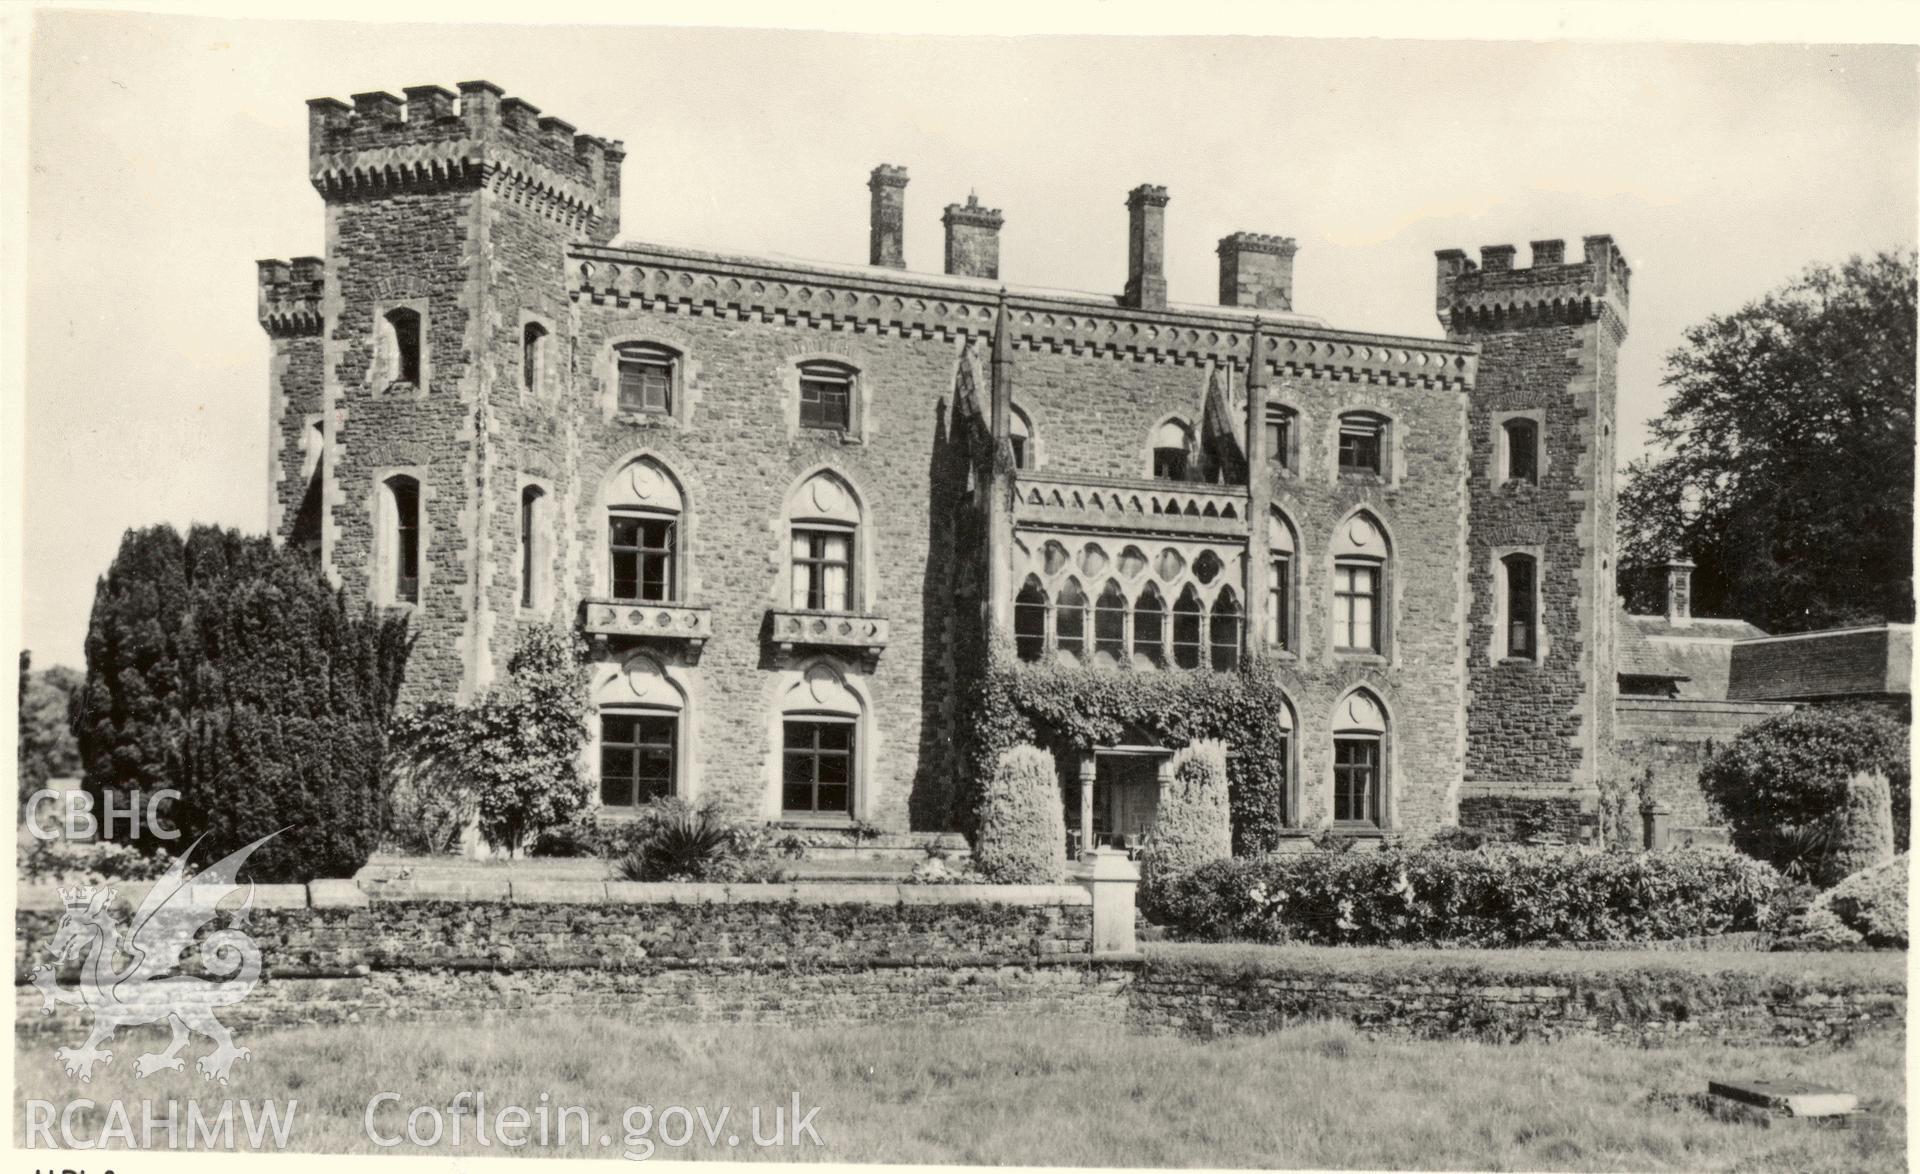 Digitised postcard image of Newton House, Llandeilo, Raphael Tuck and Sons Ltd. Produced by Parks and Gardens Data Services, from an original item in the Peter Davis Collection at Parks and Gardens UK. We hold only web-resolution images of this collection, suitable for viewing on screen and for research purposes only. We do not hold the original images, or publication quality scans.